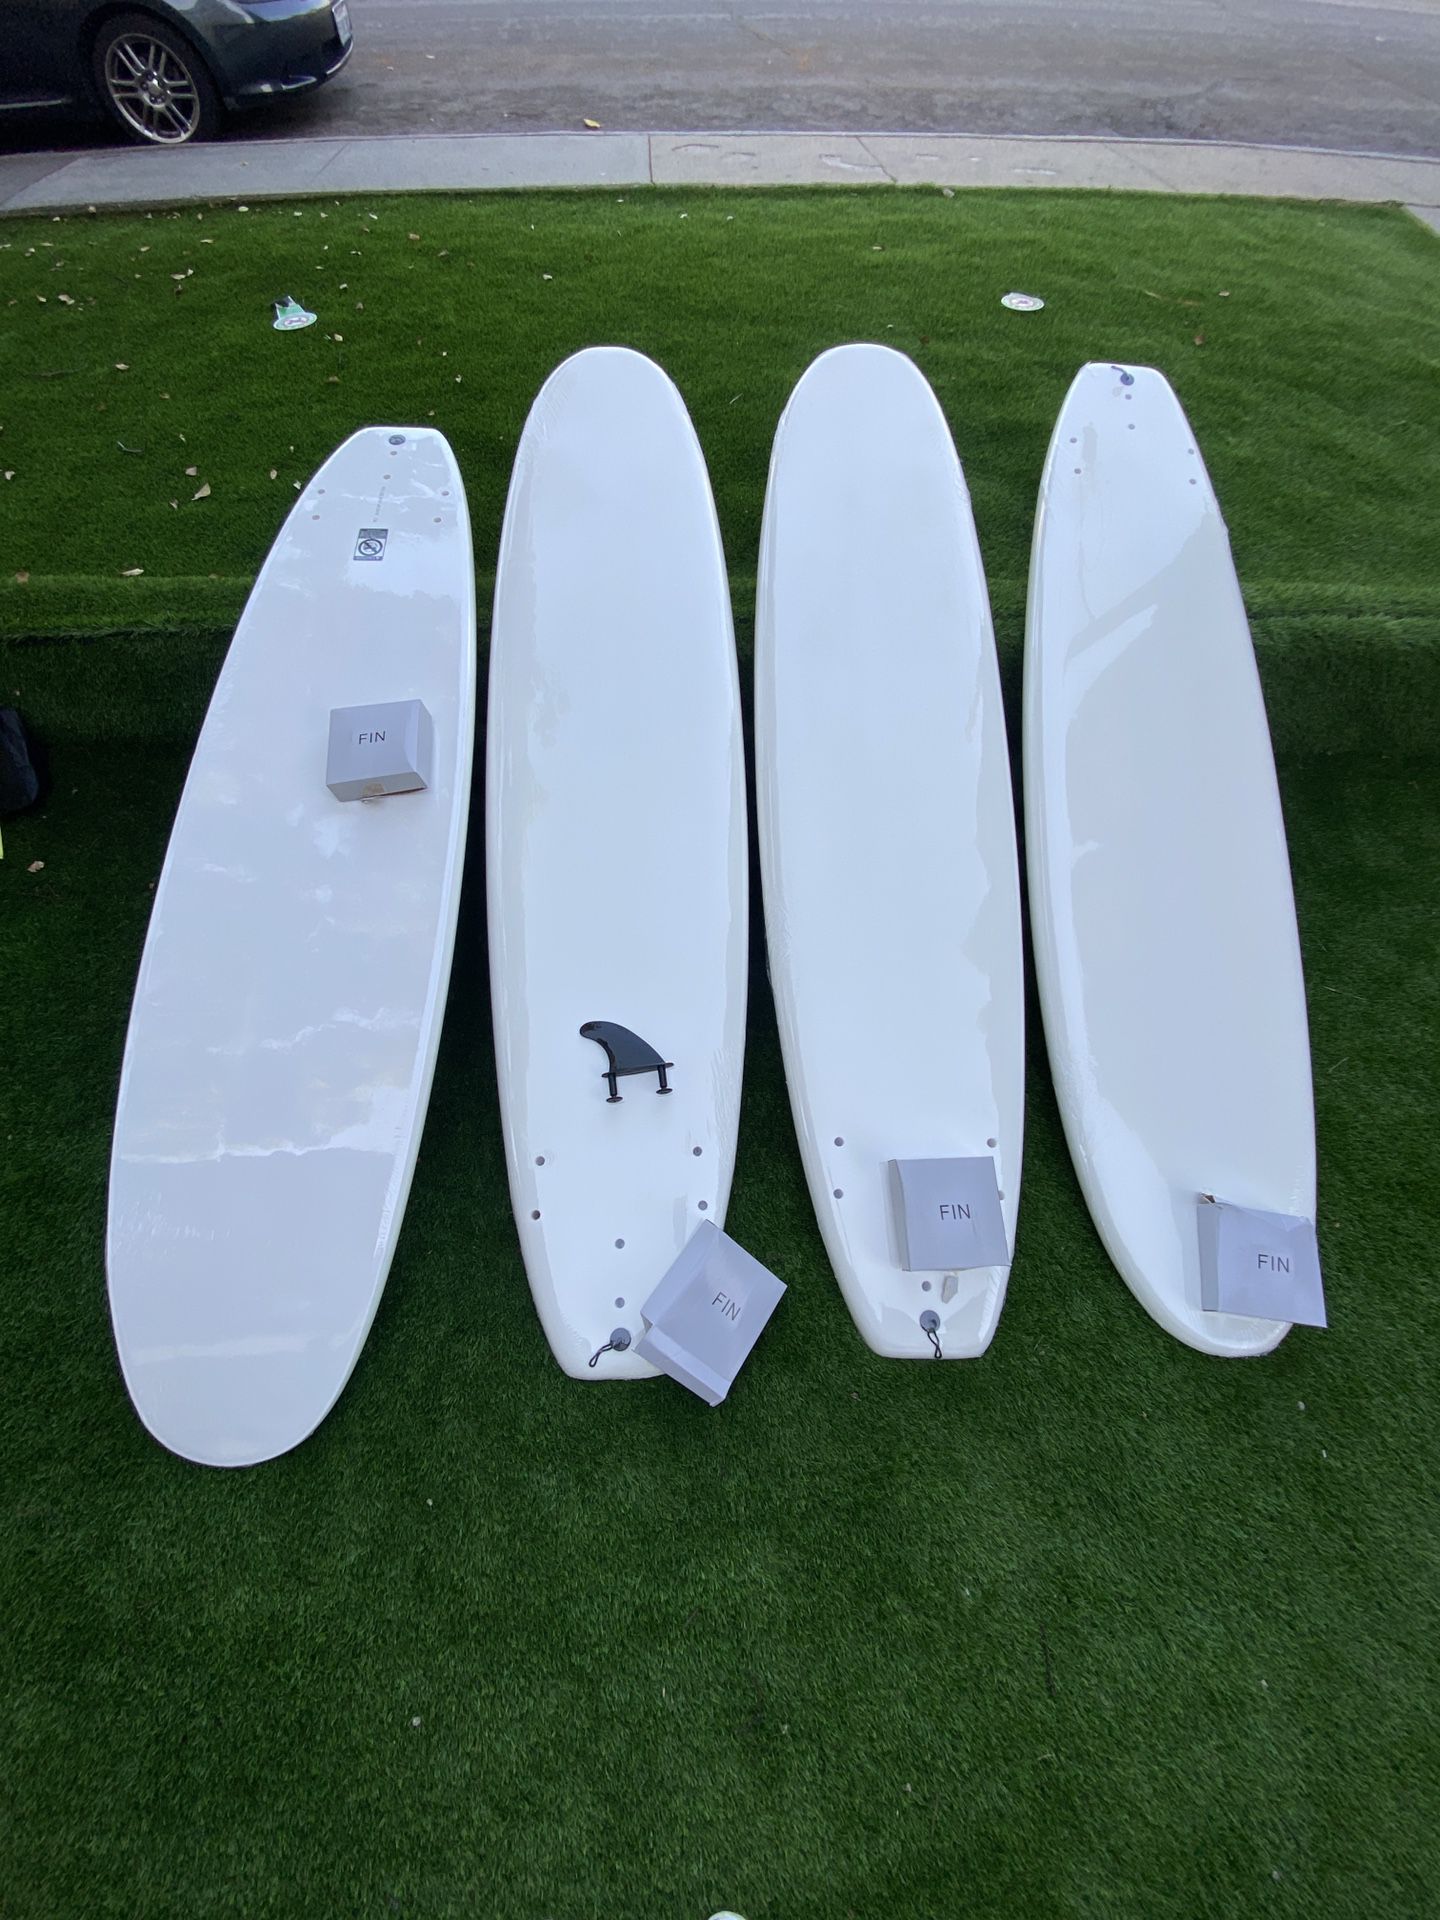 8ft Soft top Surfboards 